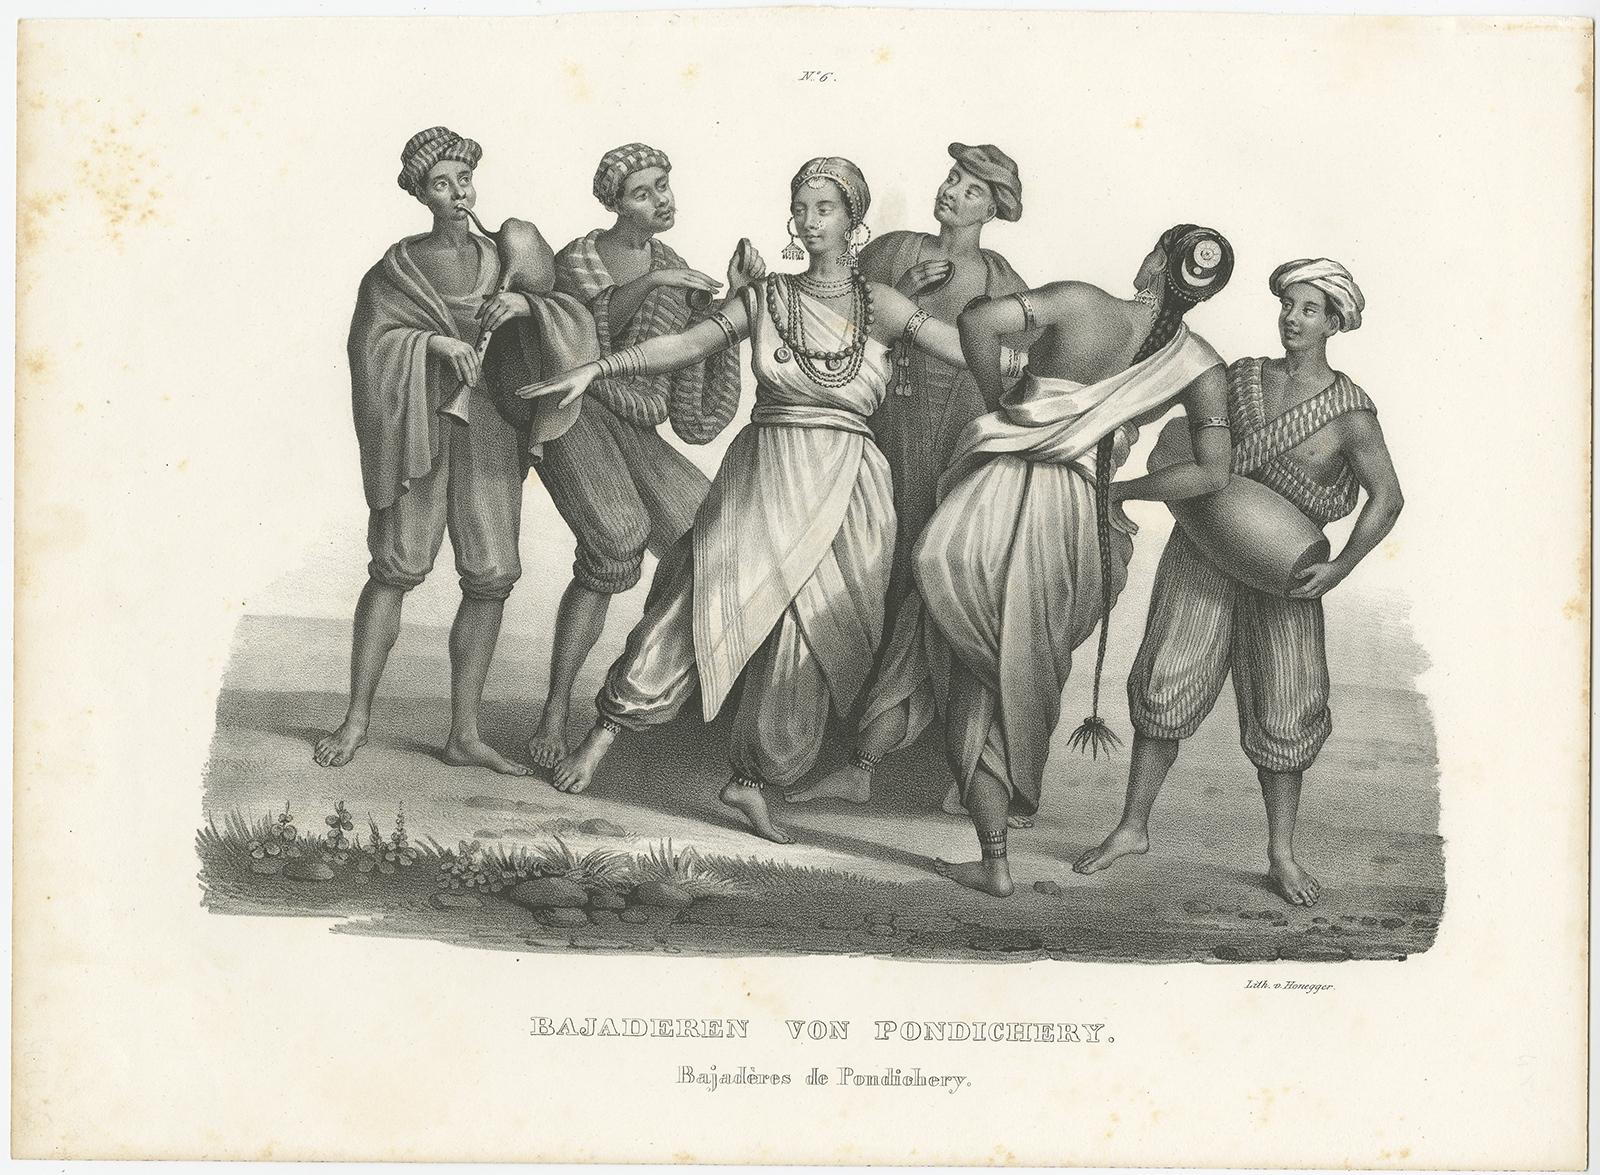 Antique print titled 'Bajaderen von Pondichery, Bajadères de Pondichery'. 

This print depicts musicians from Pondicherry, India. 

Europeans referred to exotic Indian dancers as Bajaderes (French bayadère, from Port. bailadeira – female dancer,